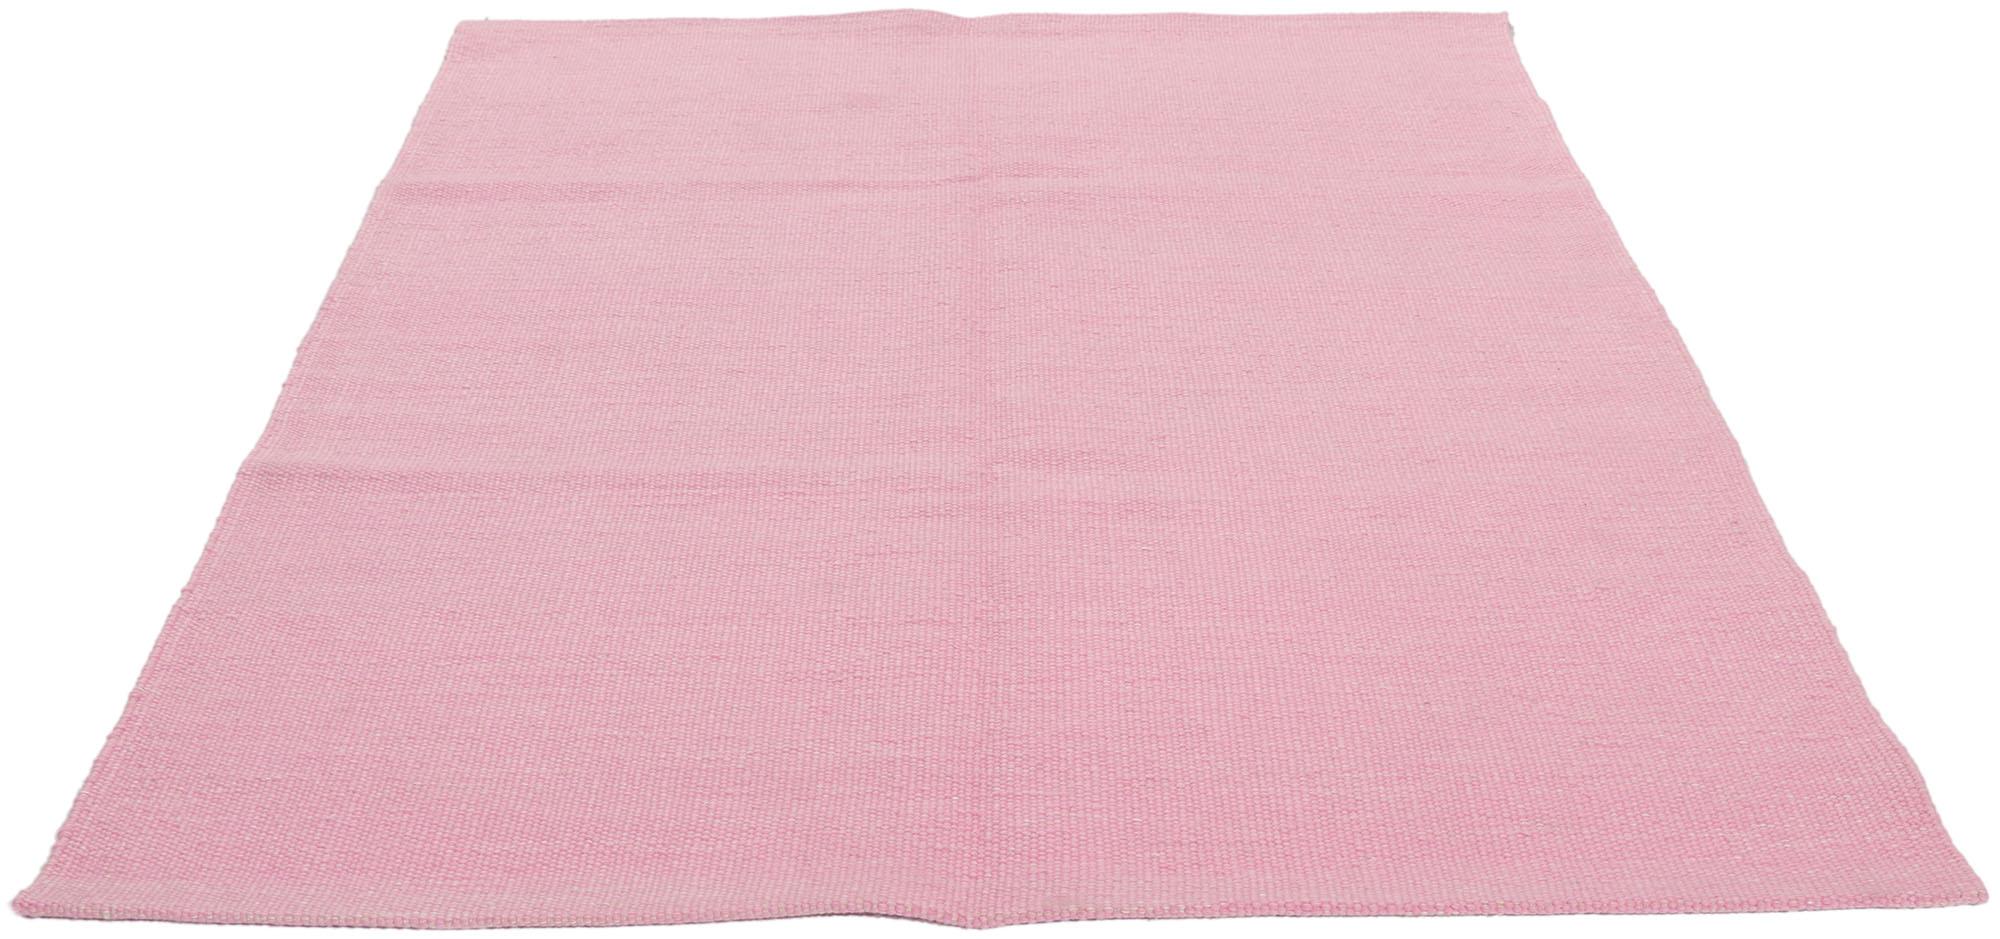 New Swedish Inspired Pink Kilim Rug with Scandinavian Modern Style In New Condition For Sale In Dallas, TX